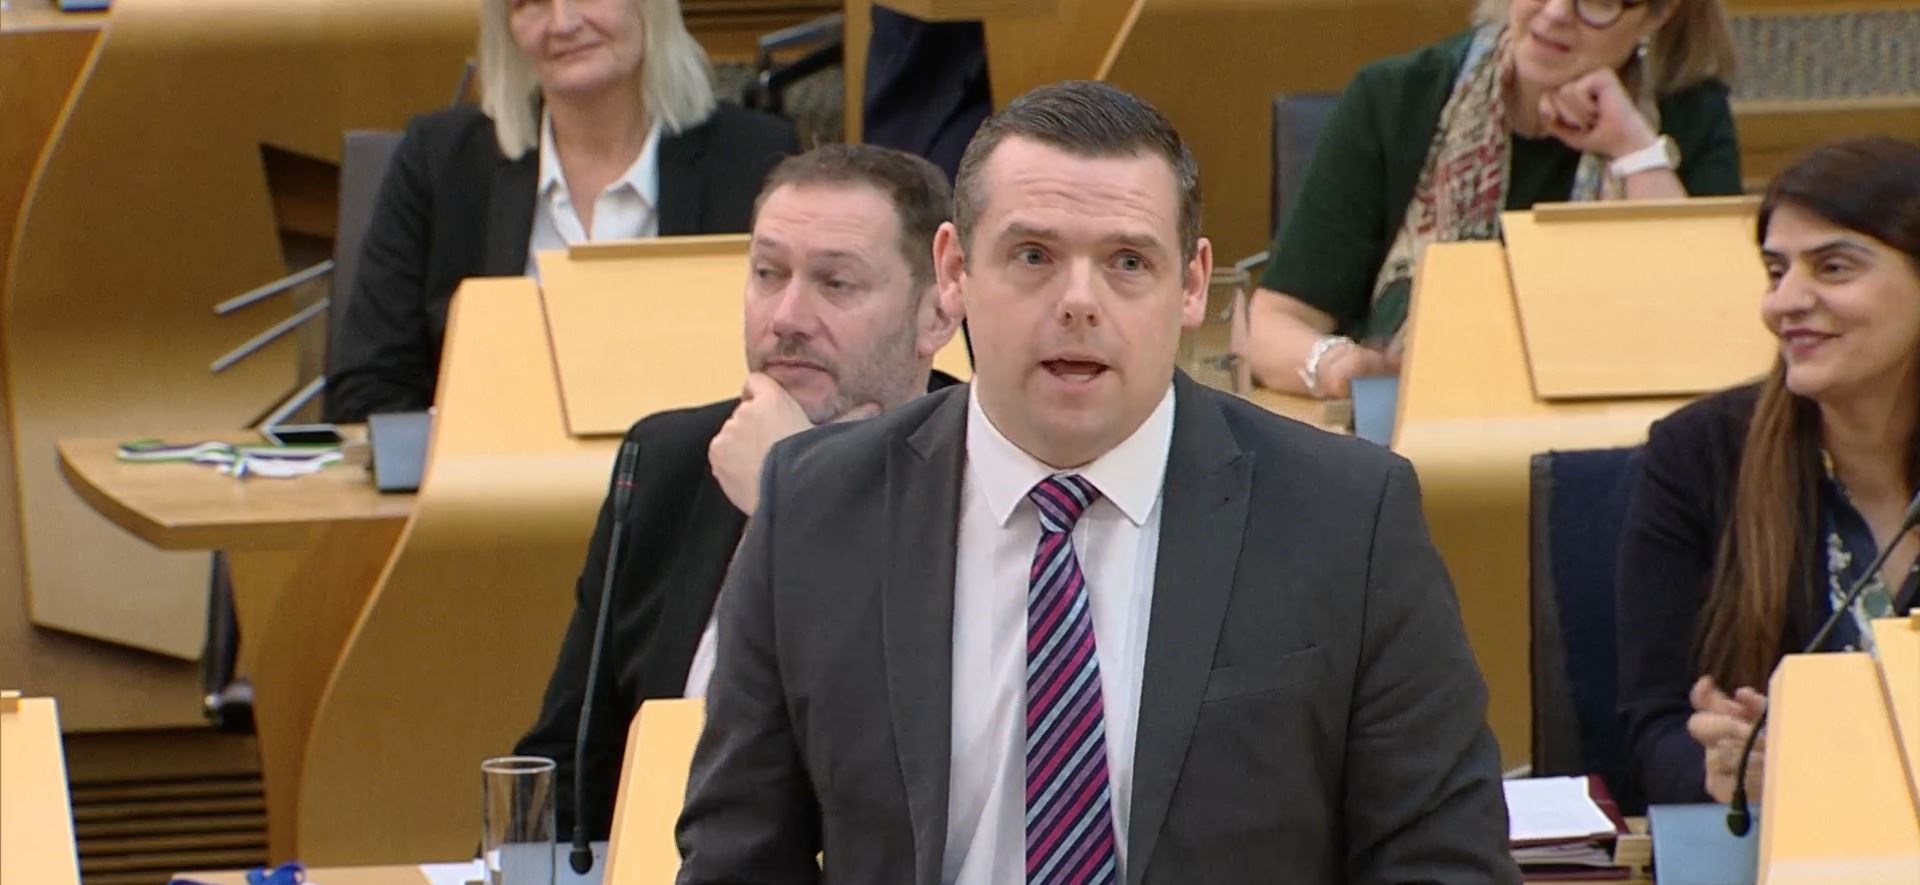 Moray MP Douglas Ross has challenged the government over Scotland's PISA results.